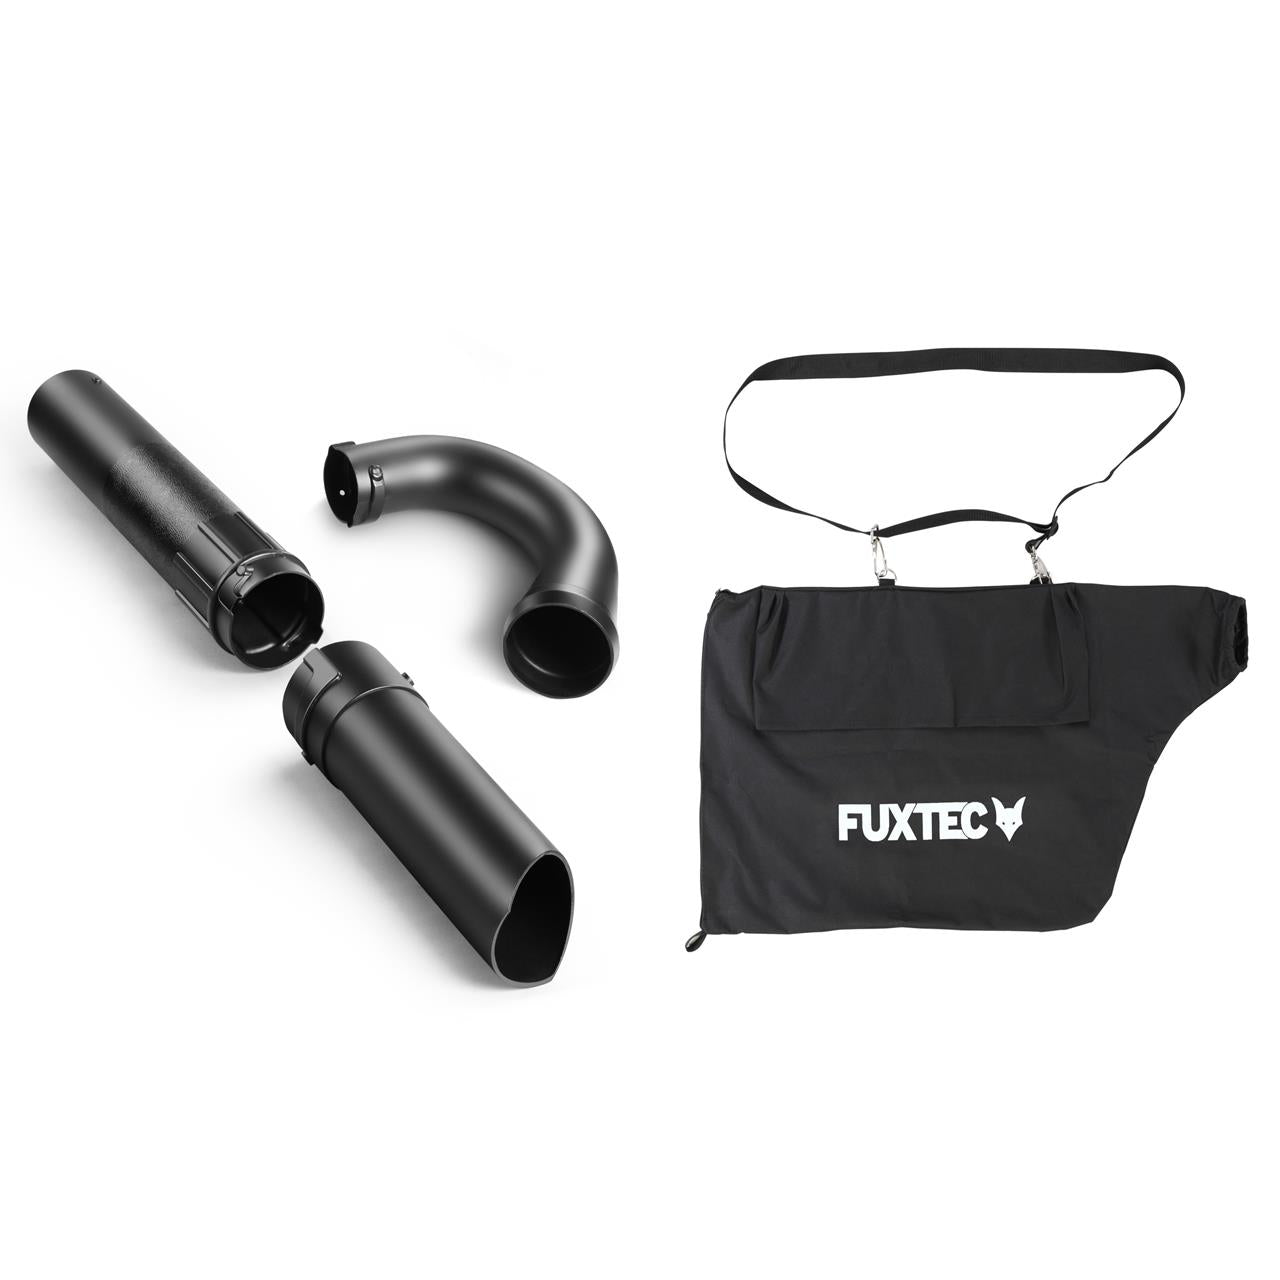 FUXTEC leaf blower accessory package - additional suction and chopping FX-SR126